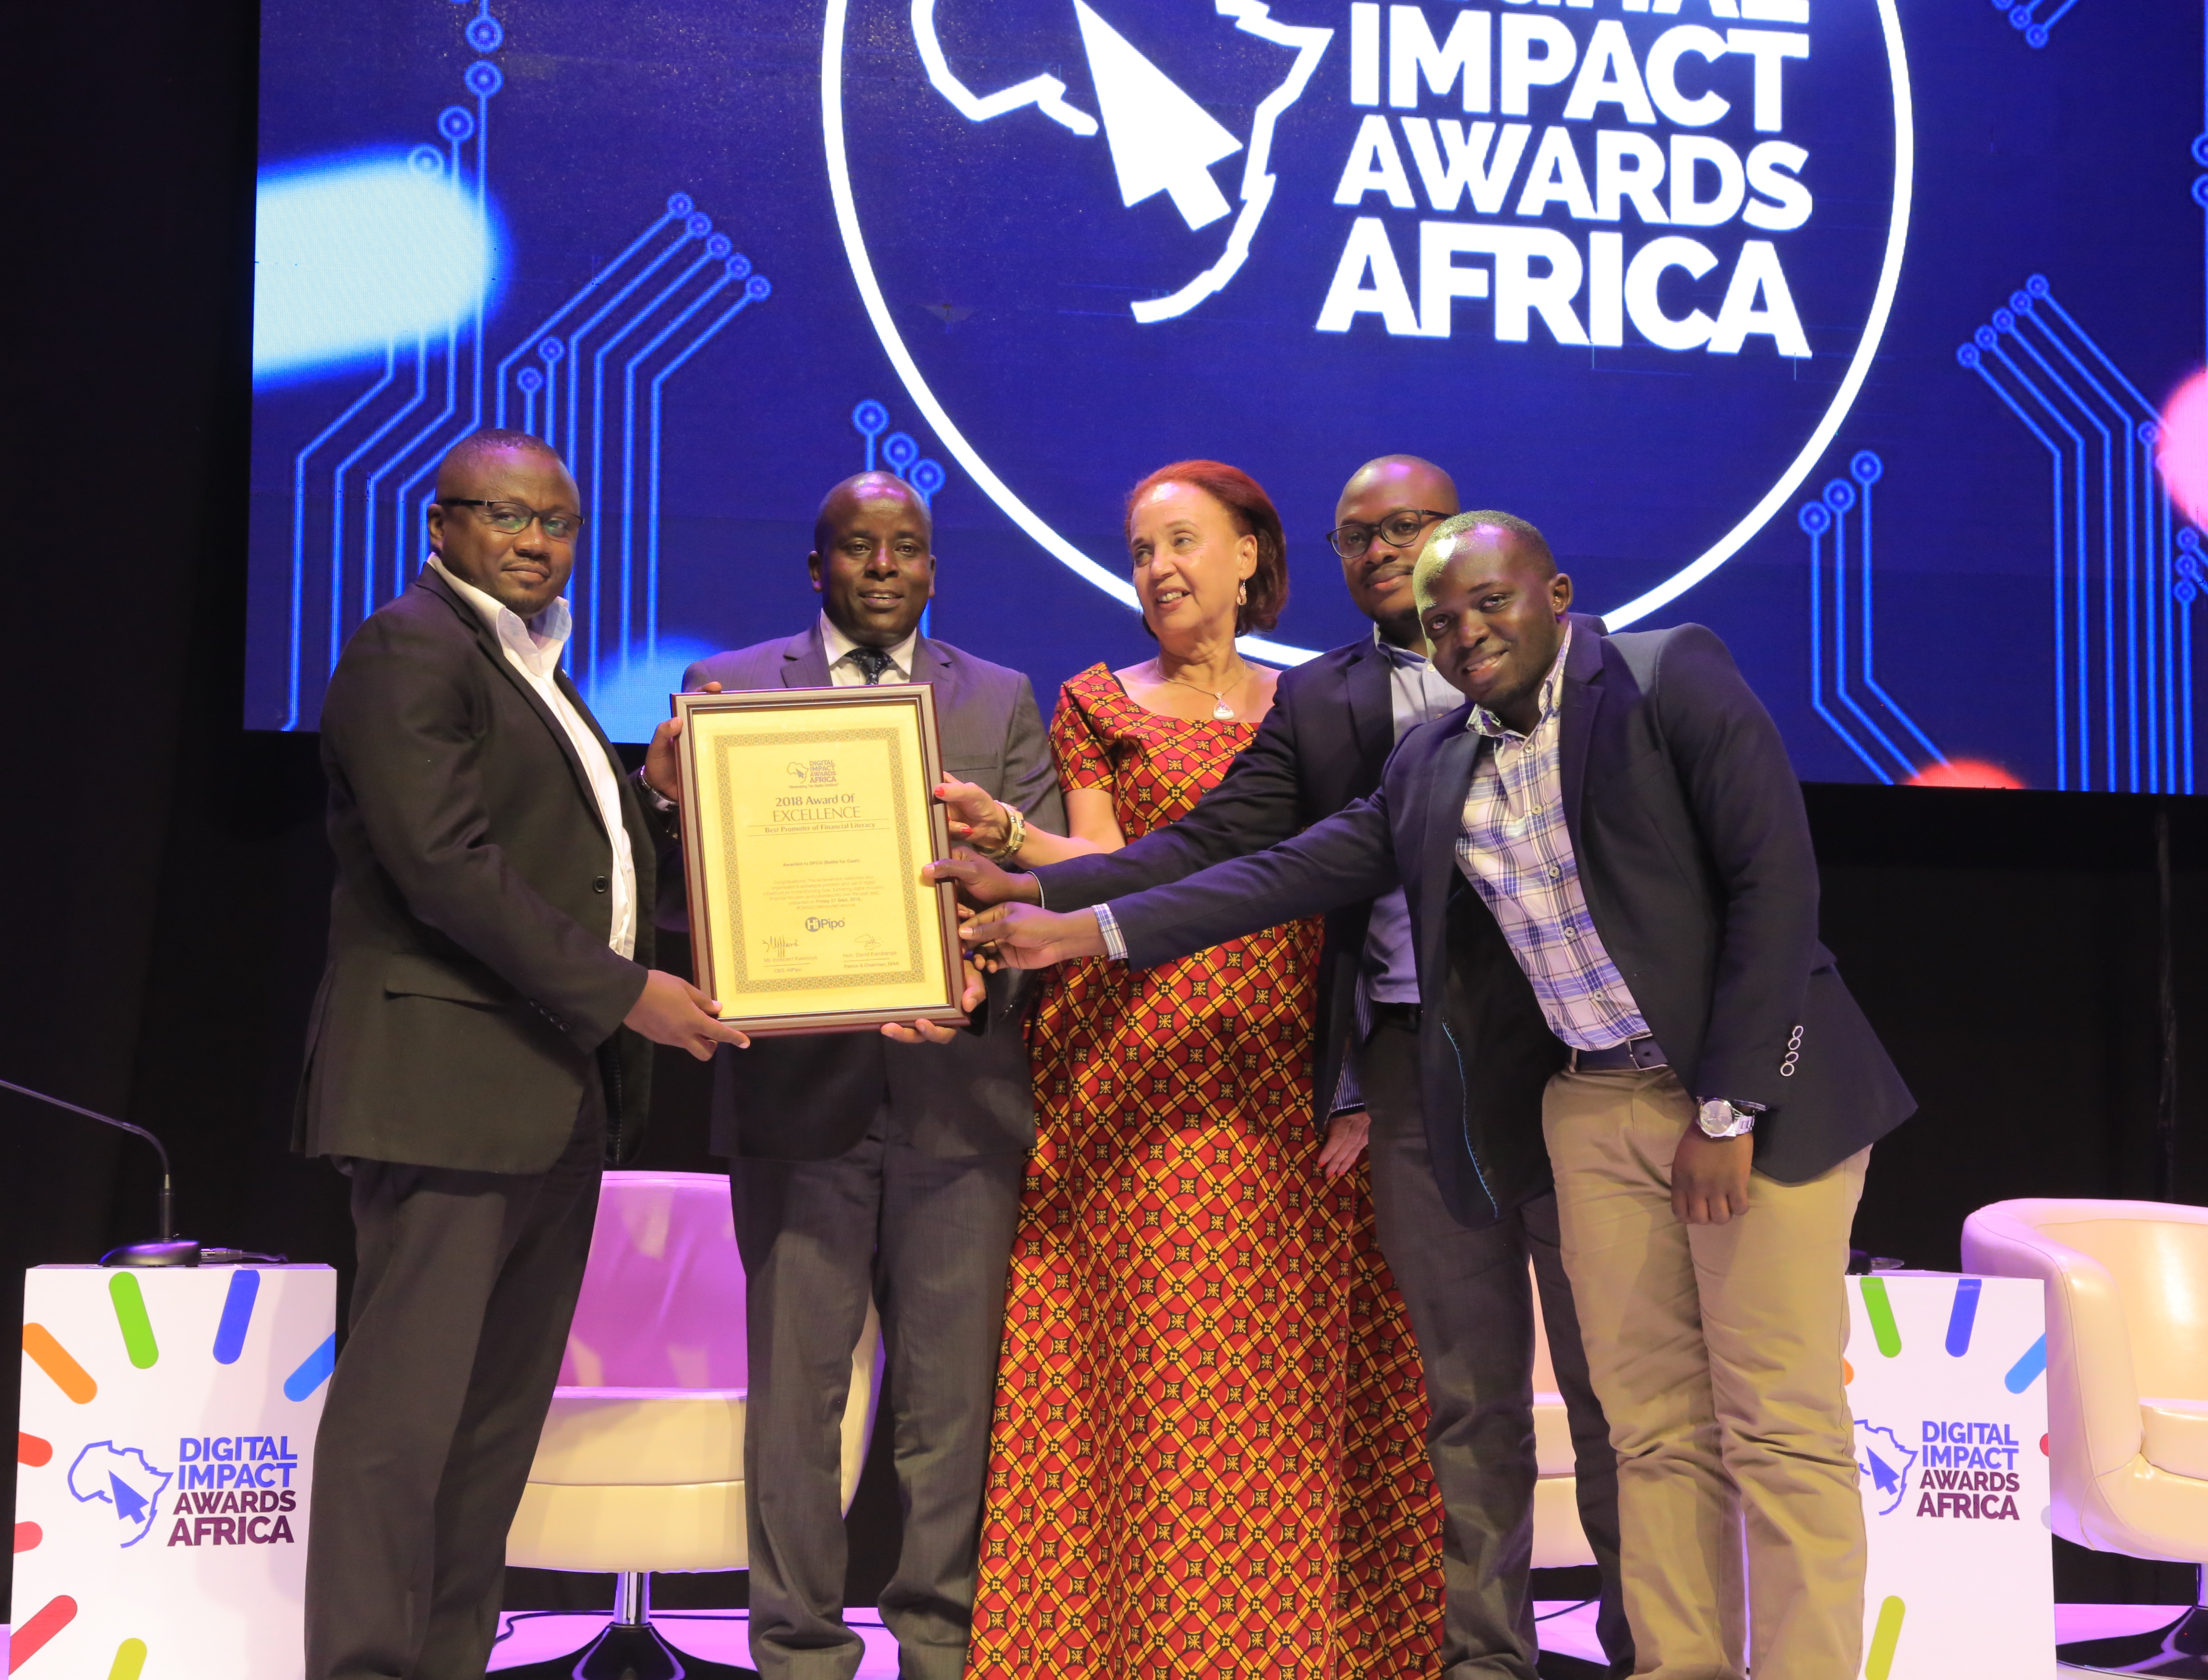 Dfcu Awarded for Country-Wide Financial Literacy Efforts